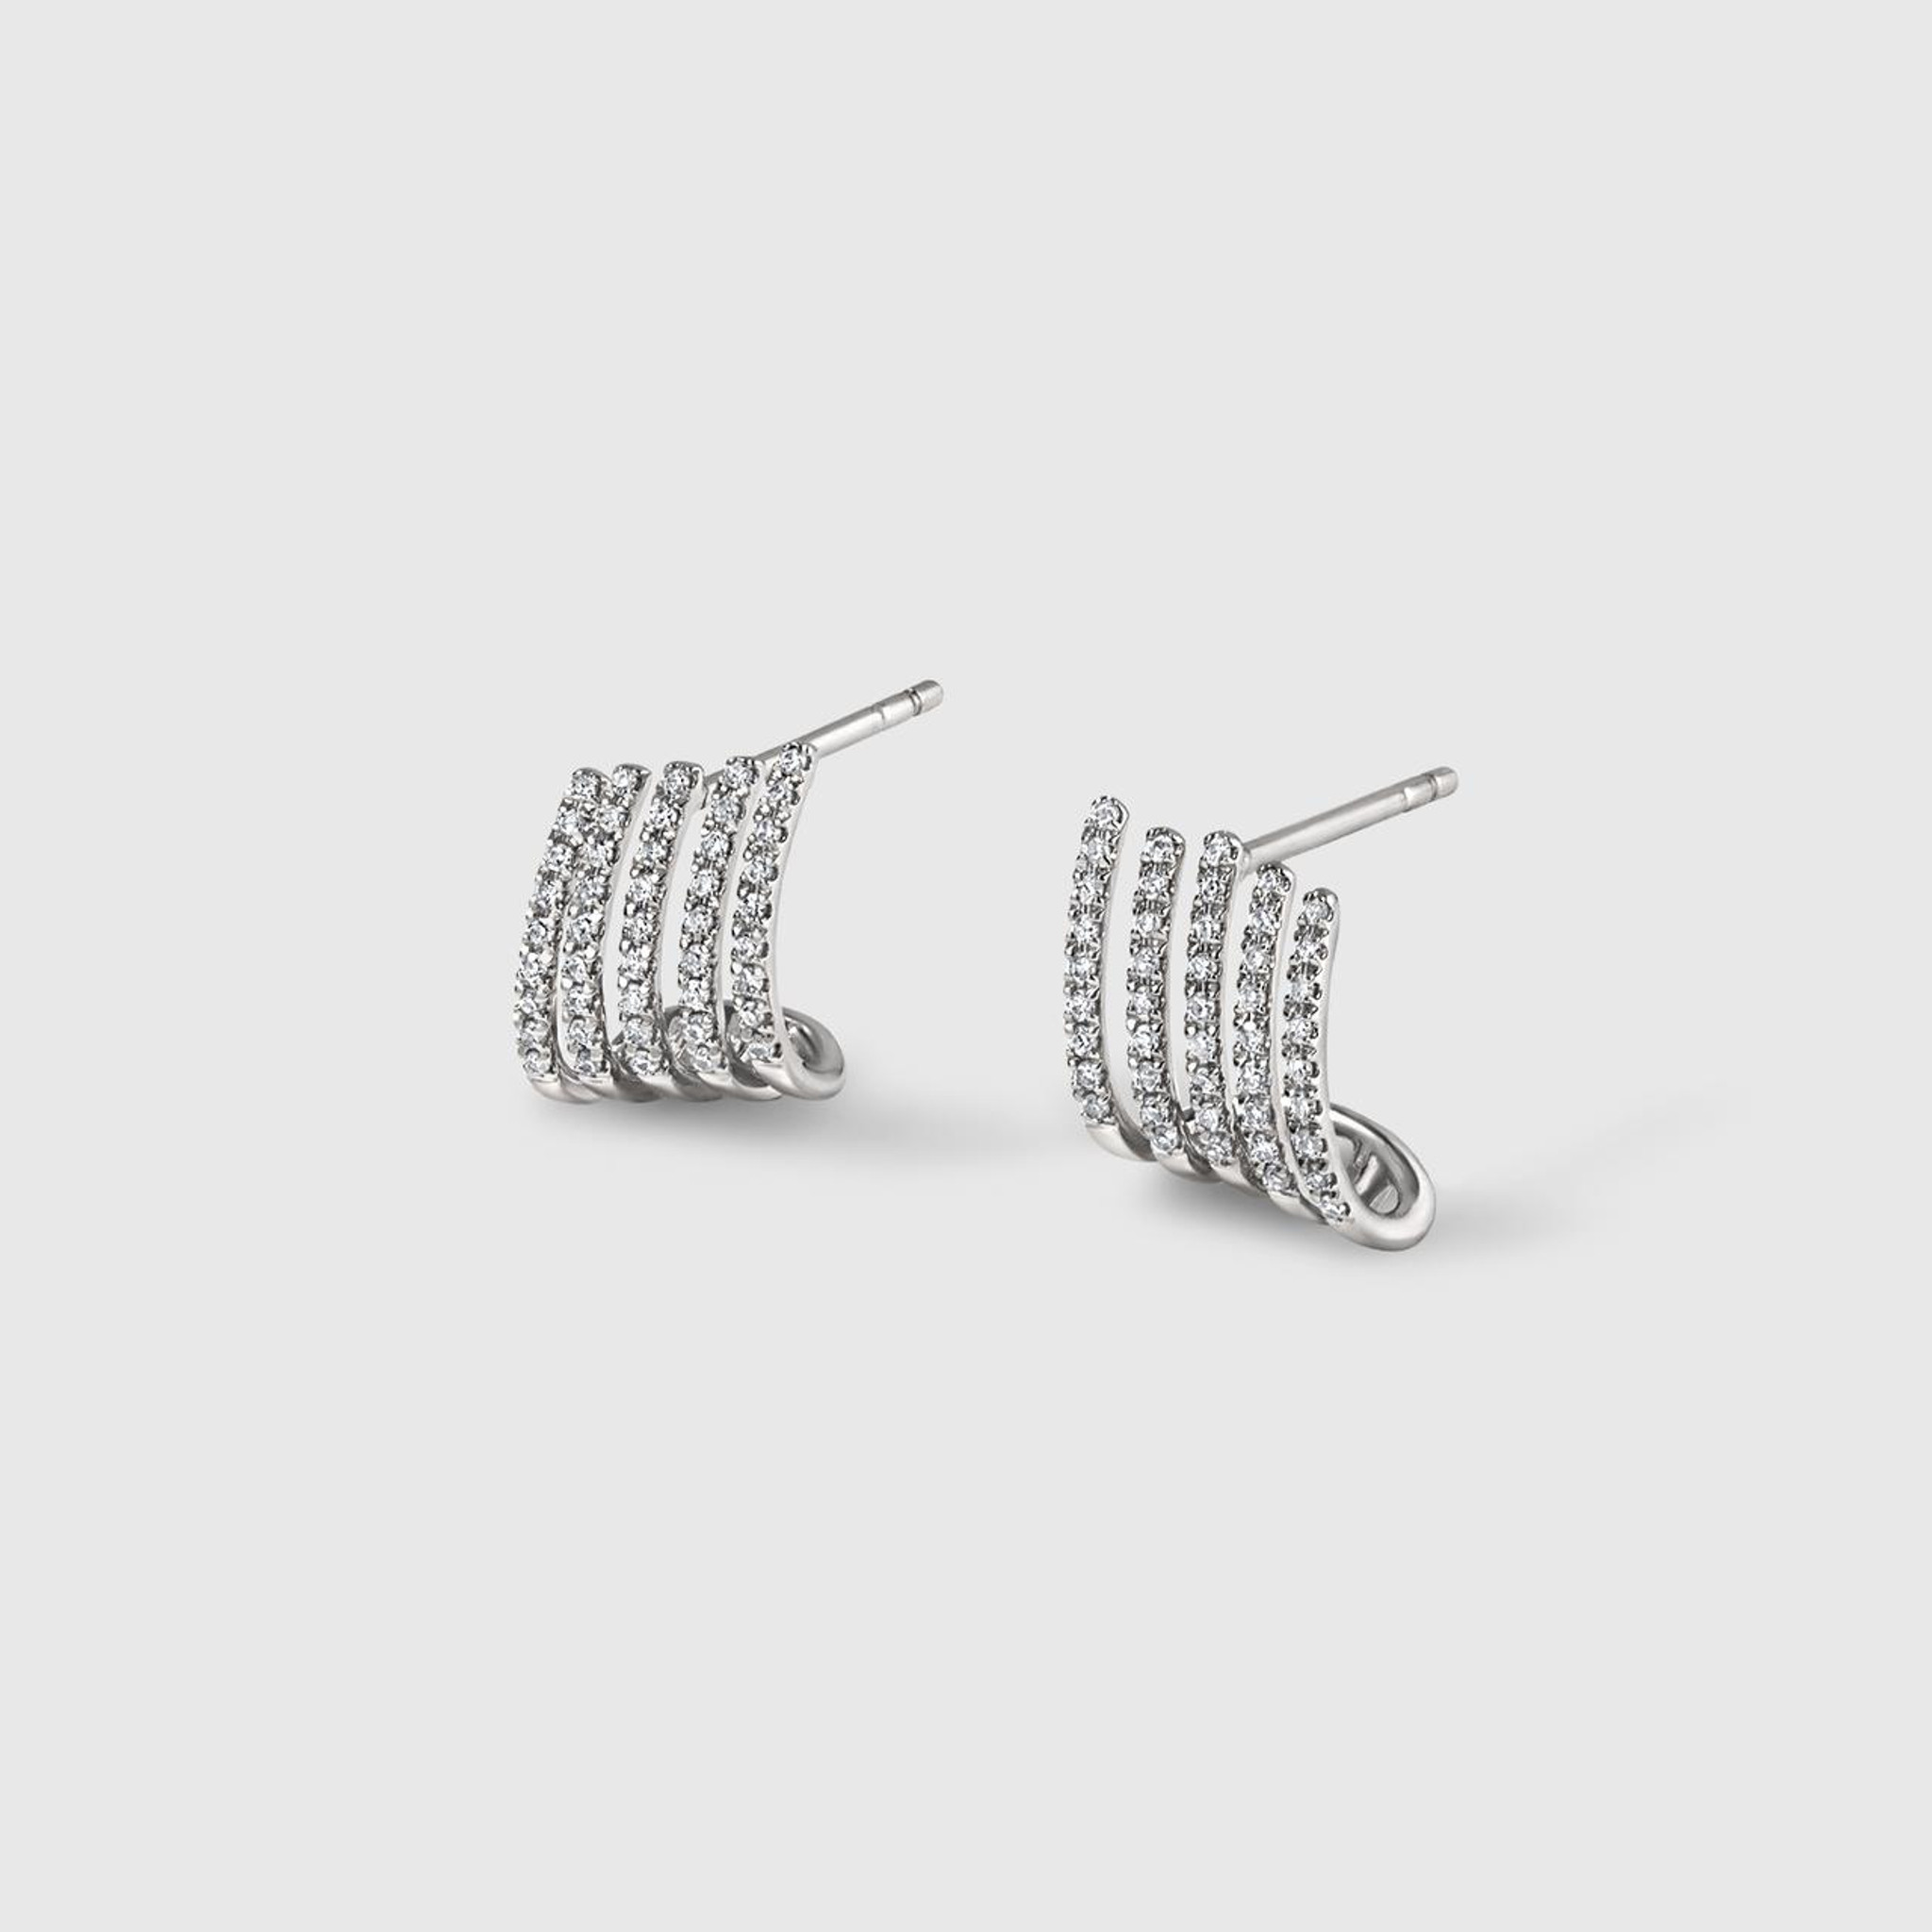 Sophia by Design Small, Stunning 0.19 ct Diamond and 14kt White Gold, Curved Five-Row Post Earrings 